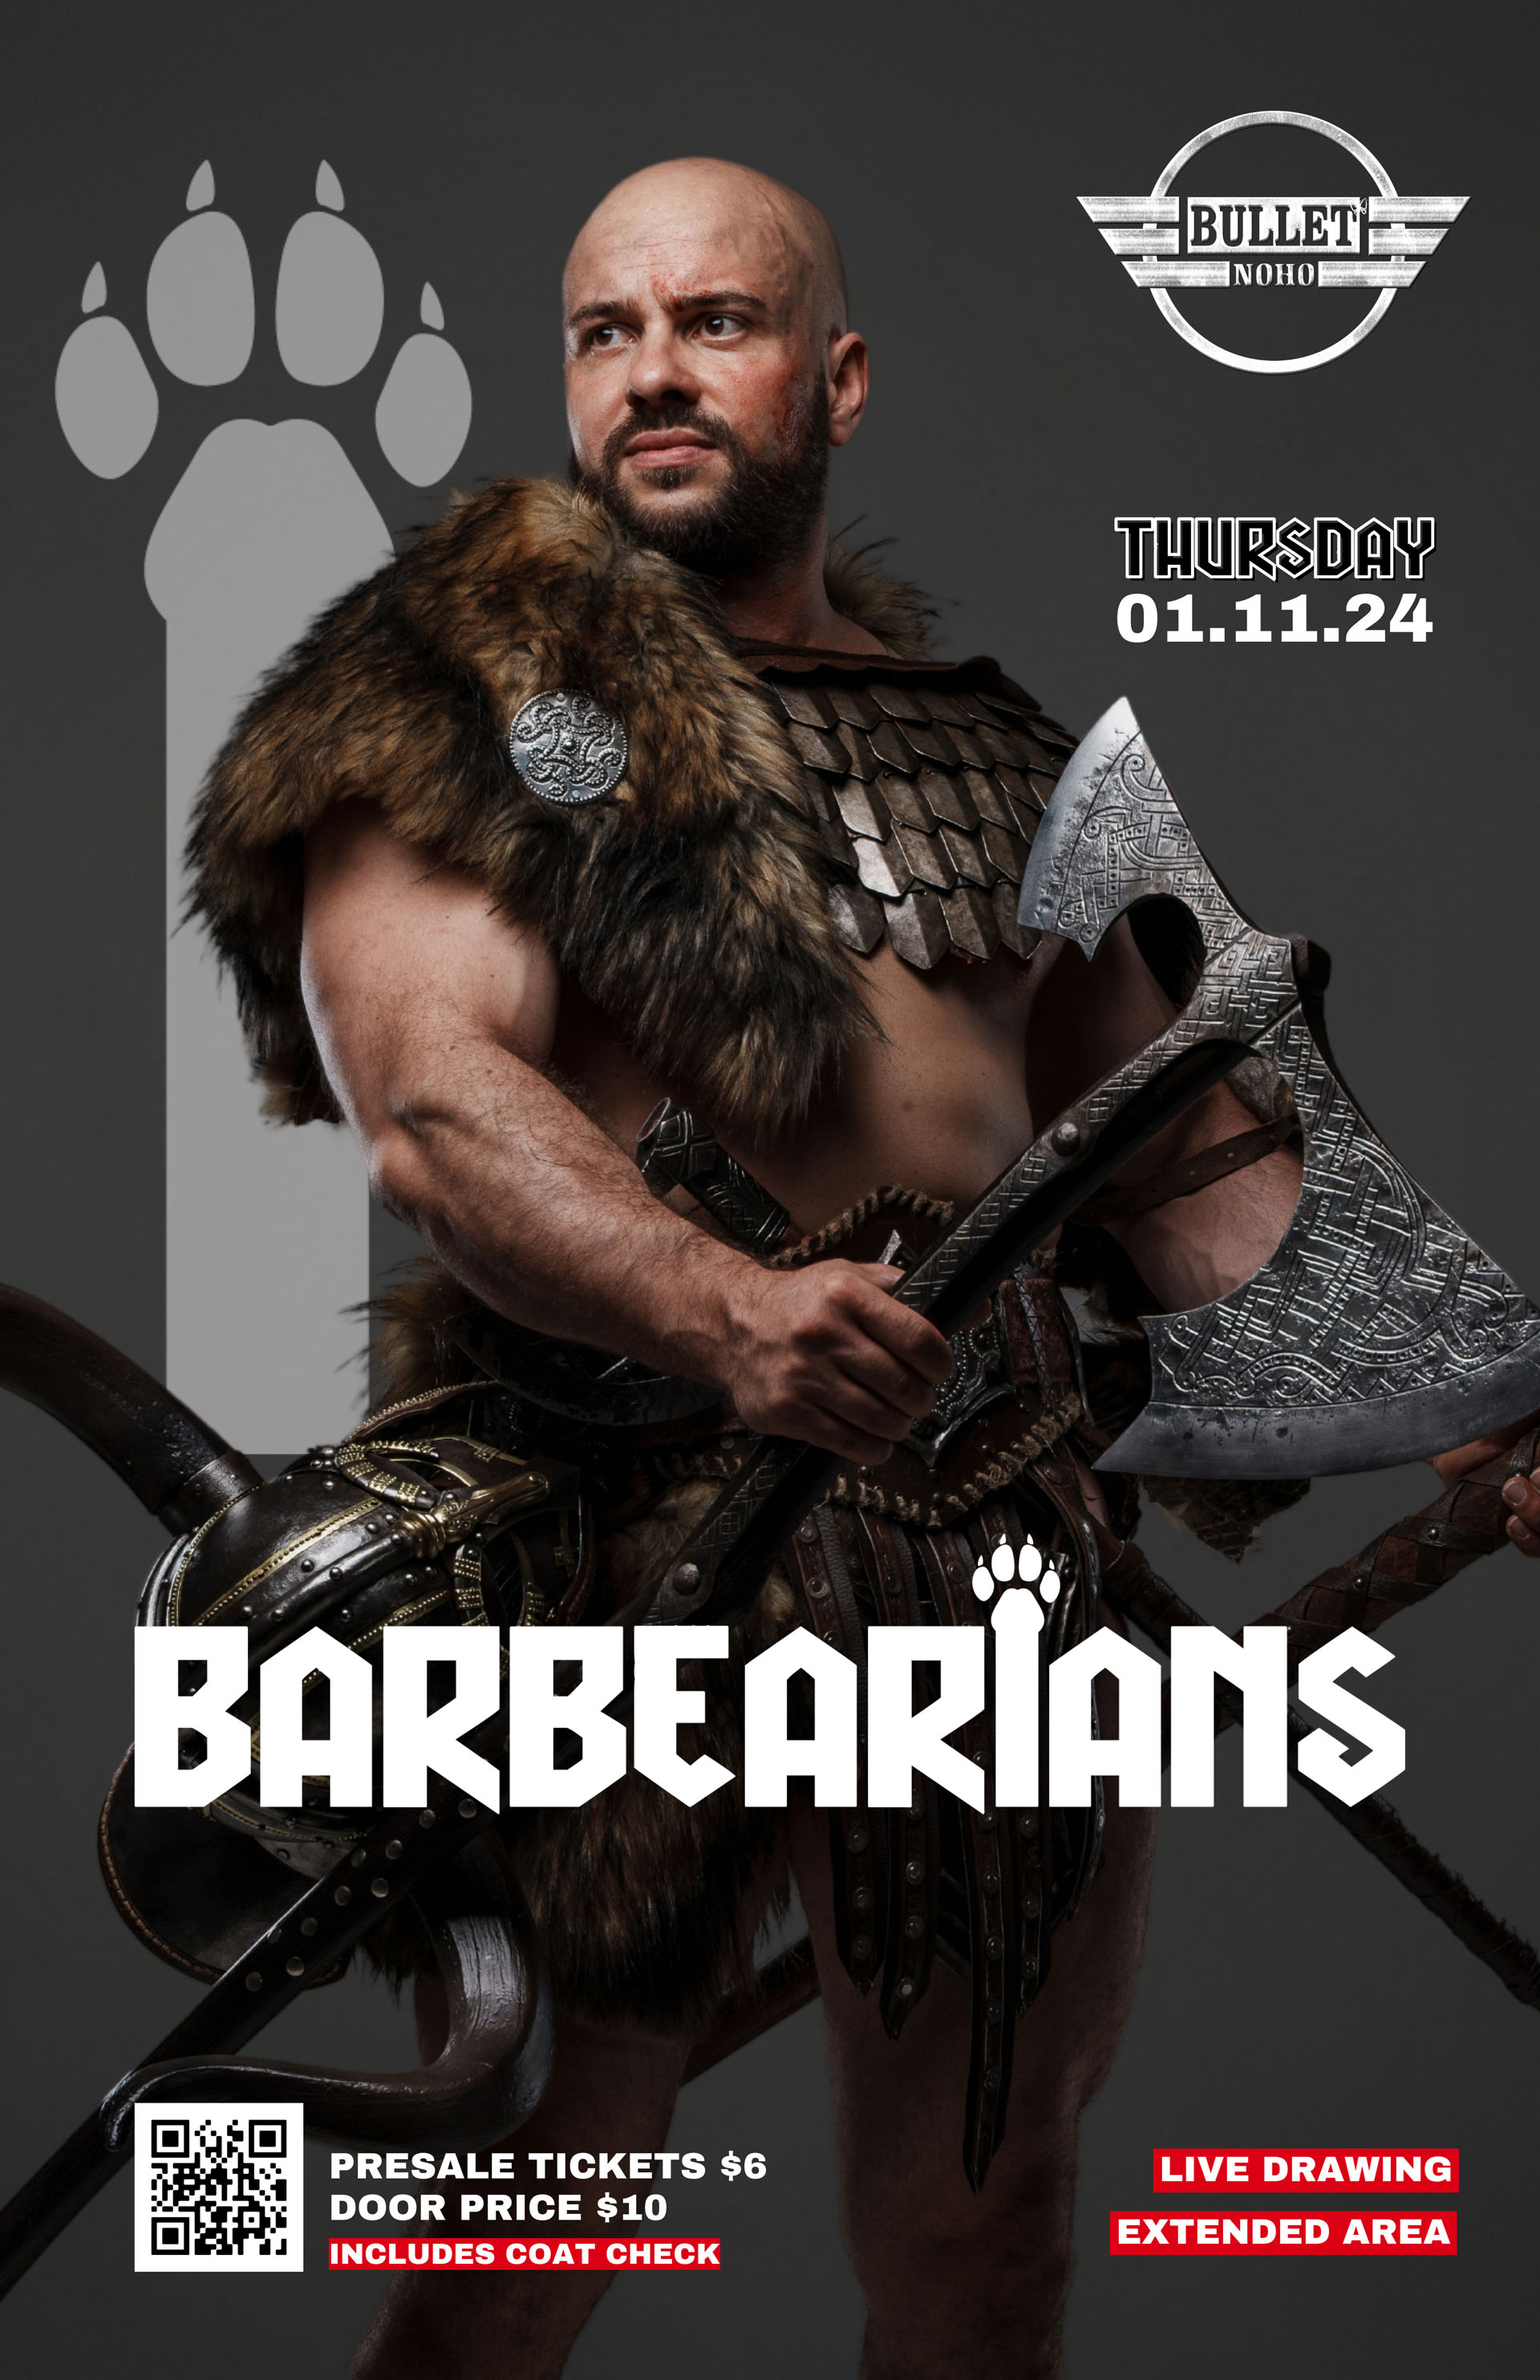 THE BULLET BAR Presents BARBEARIANS: A BEAR & LEATHER EVENT: Thursday, 01/11/24 at 9:00 PM. Presale Tickets $6 and Door Cover $10. Presales: https://humpevents.com/barbearians